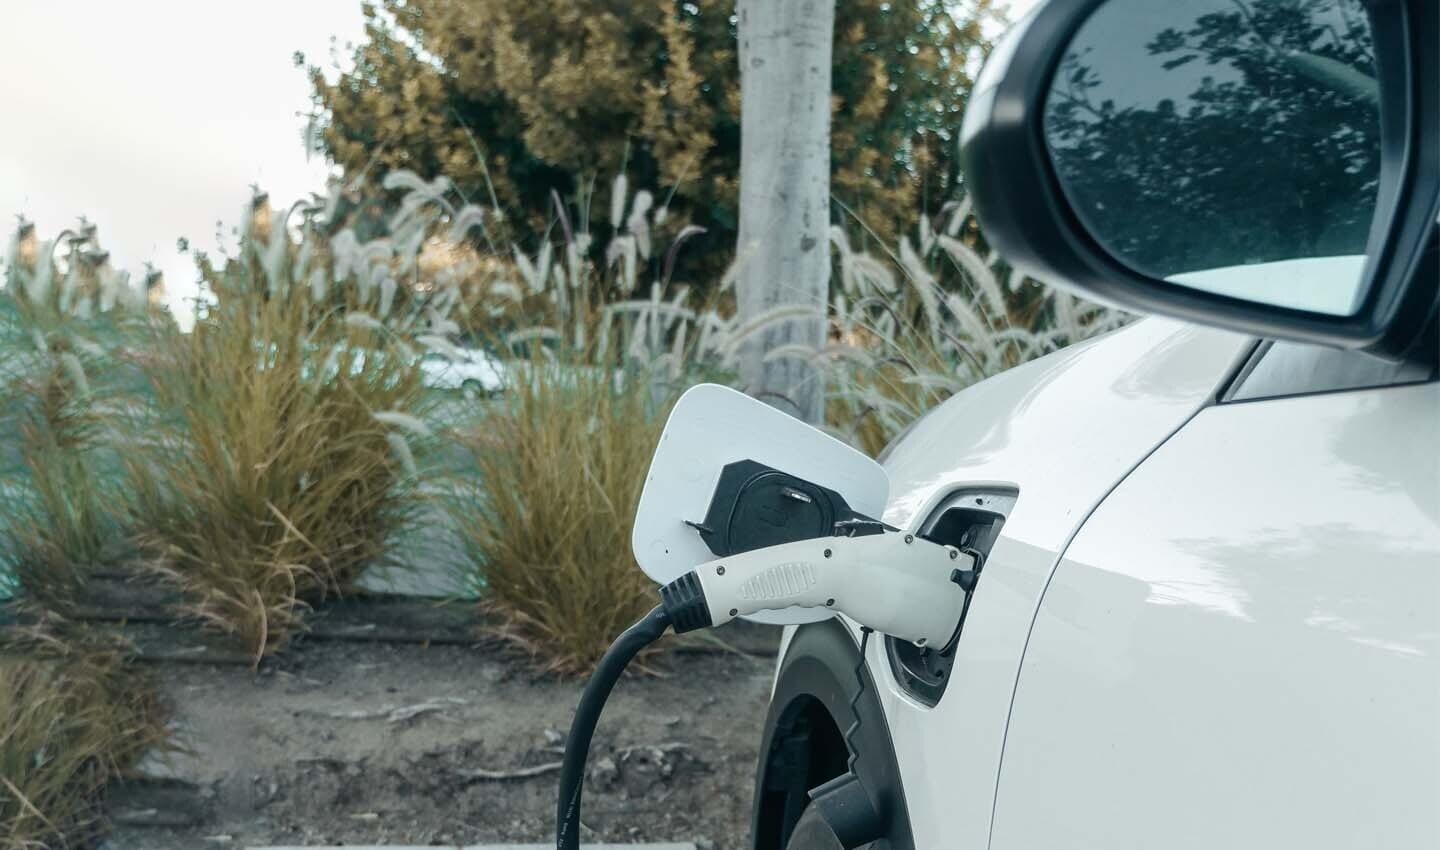 EVs have increased their range by 15% in the past several years.